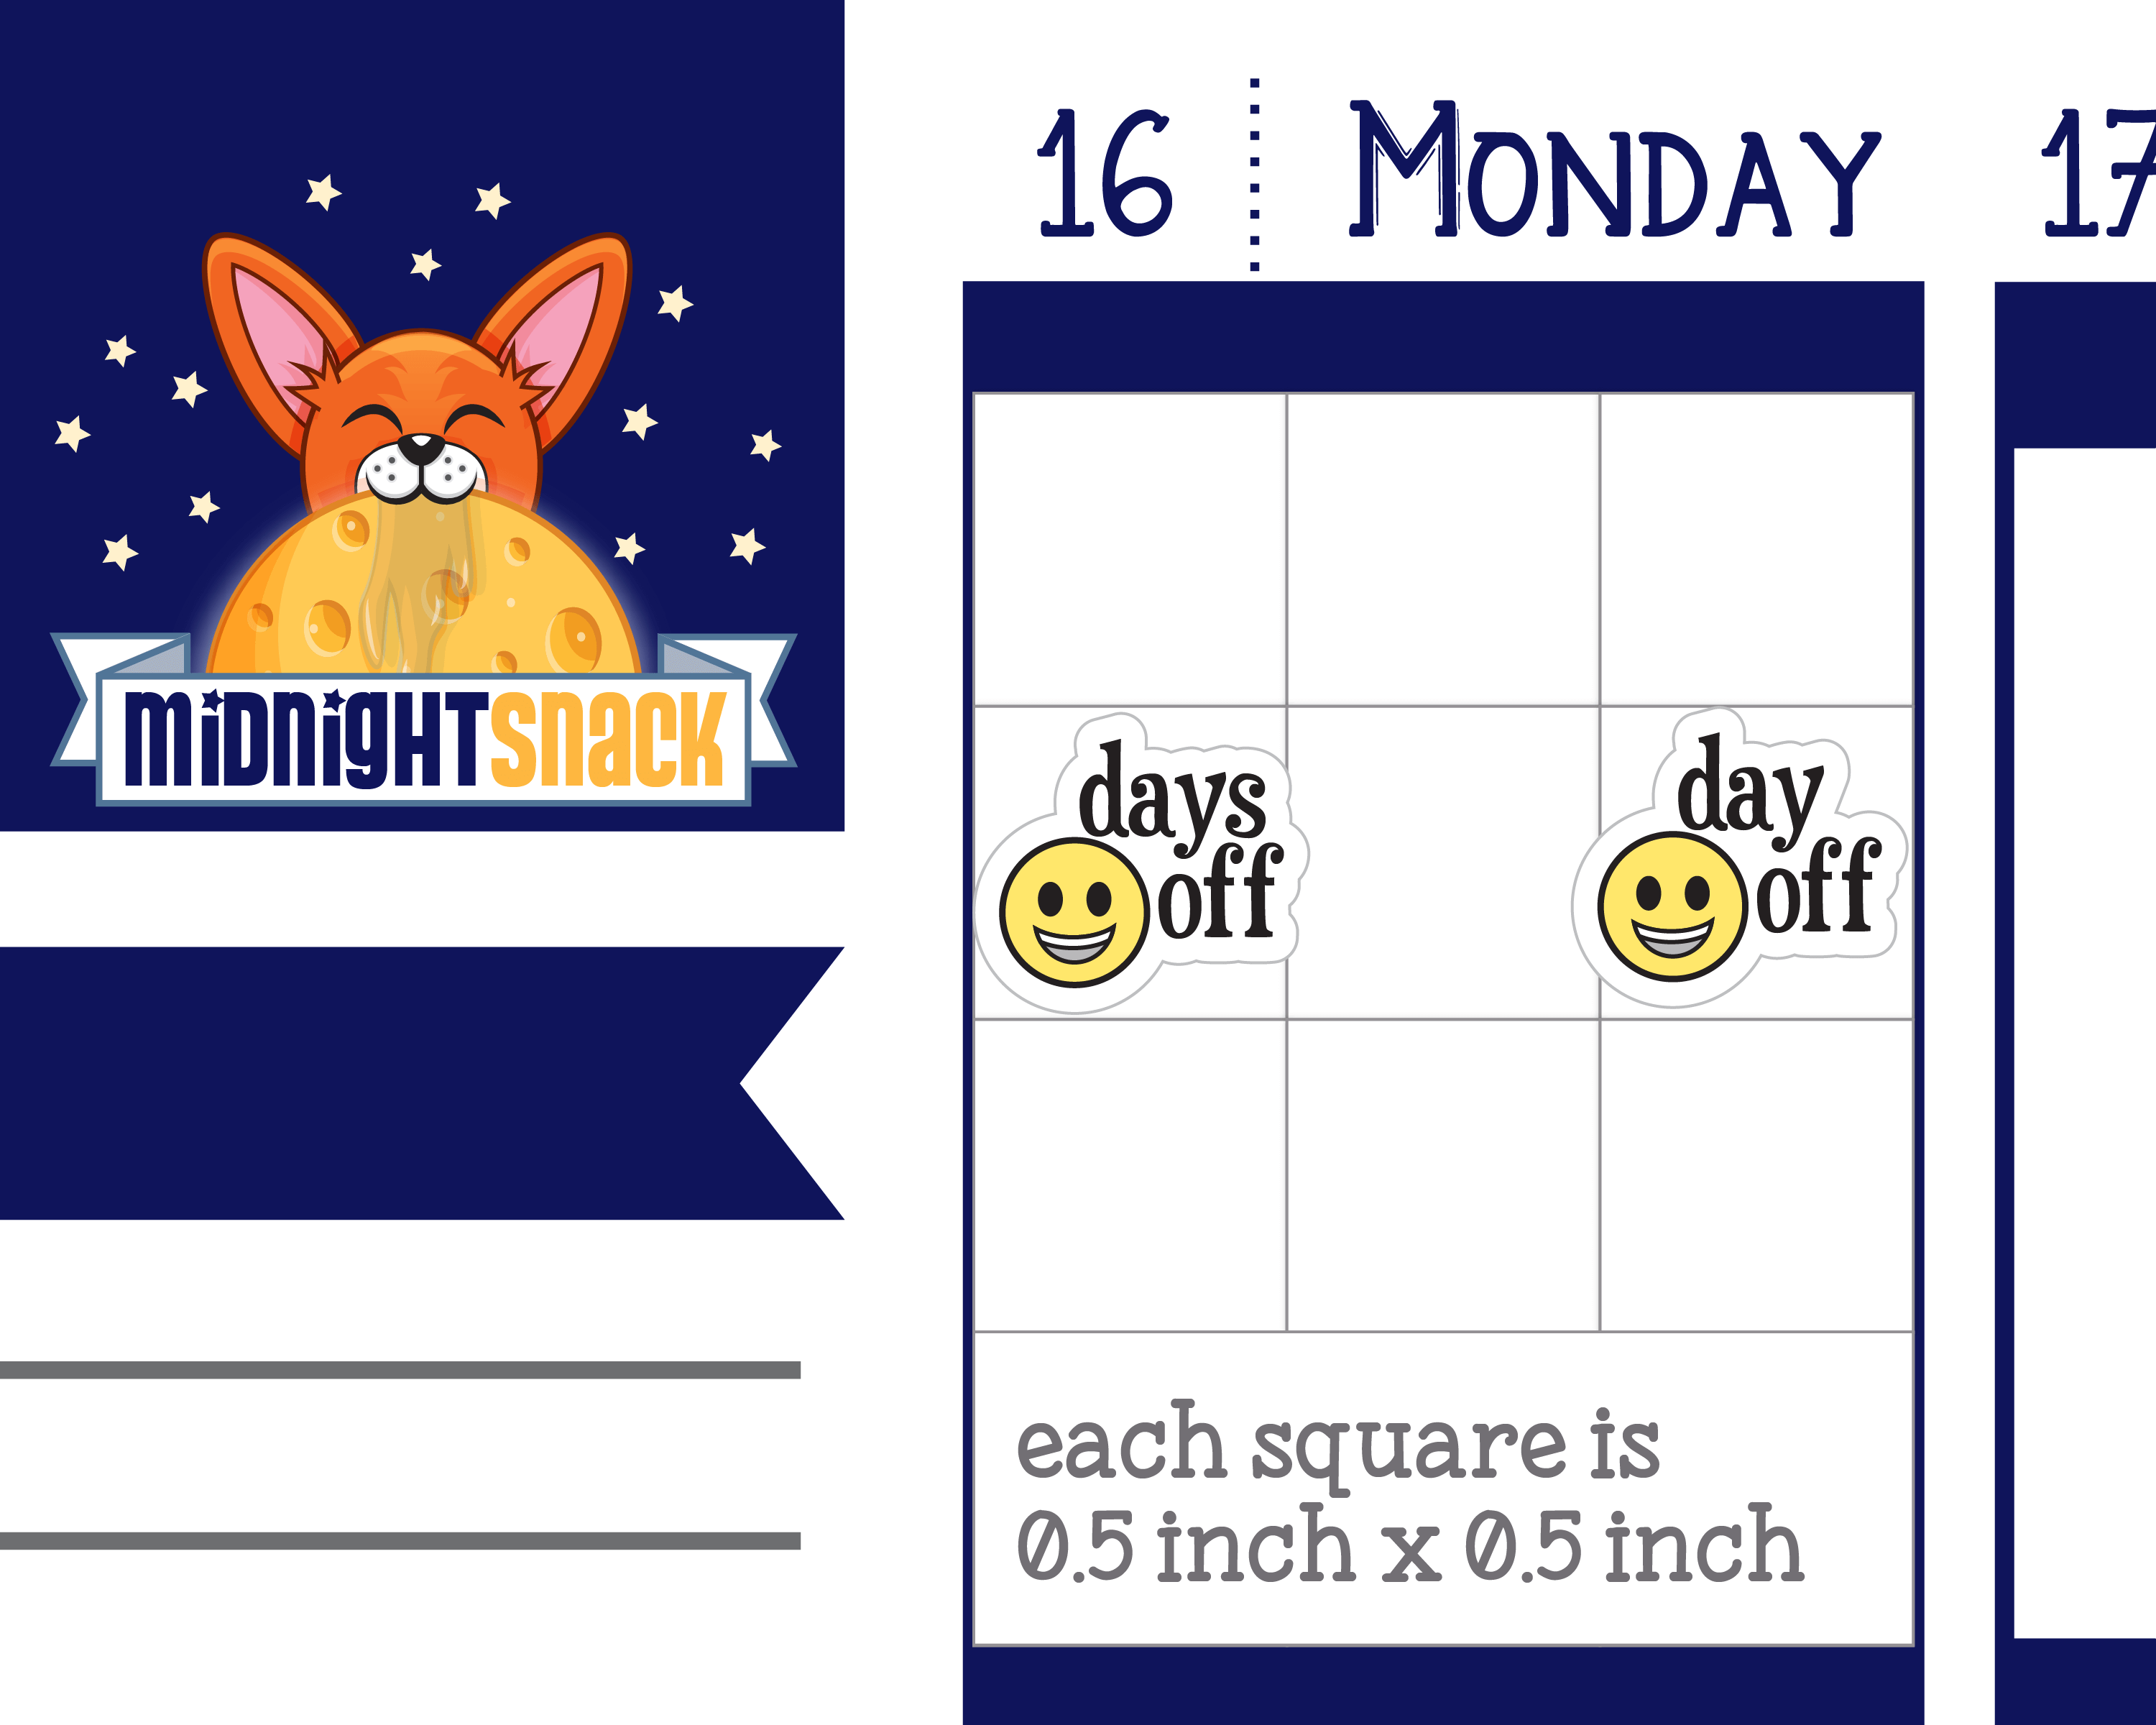 Days Off Happy Face Icon: Work Day Planner Stickers: Midnight Snack Planner Stickers